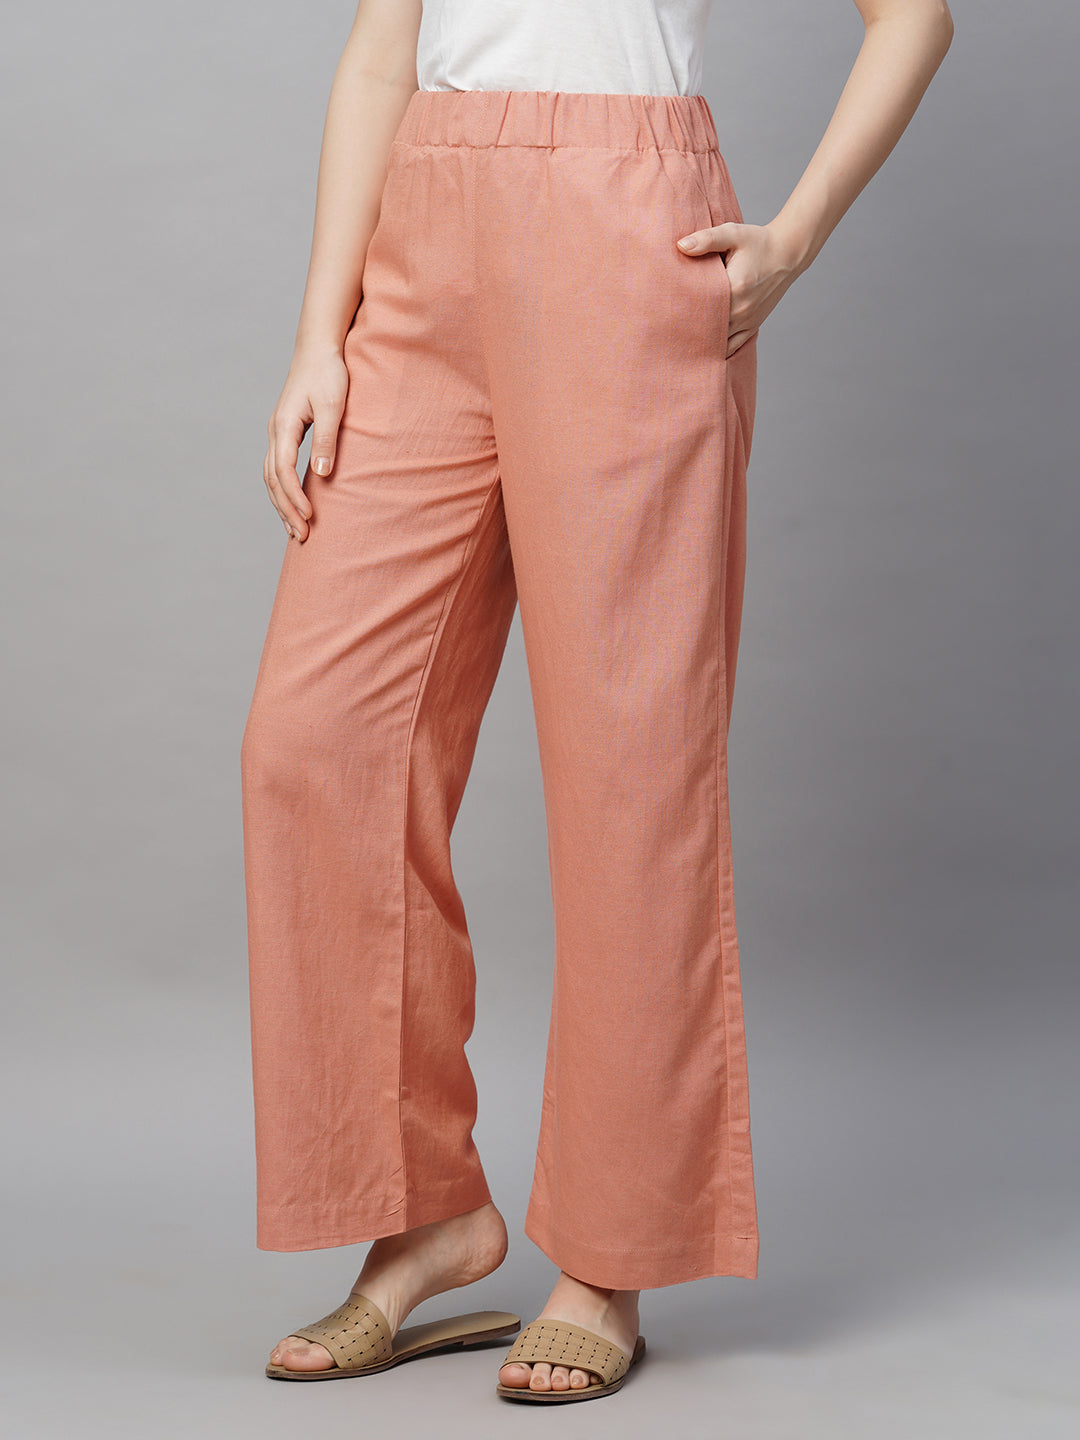 TULIP 21 Women Peach-Coloured Solid Dhoti Pants - Absolutely Desi